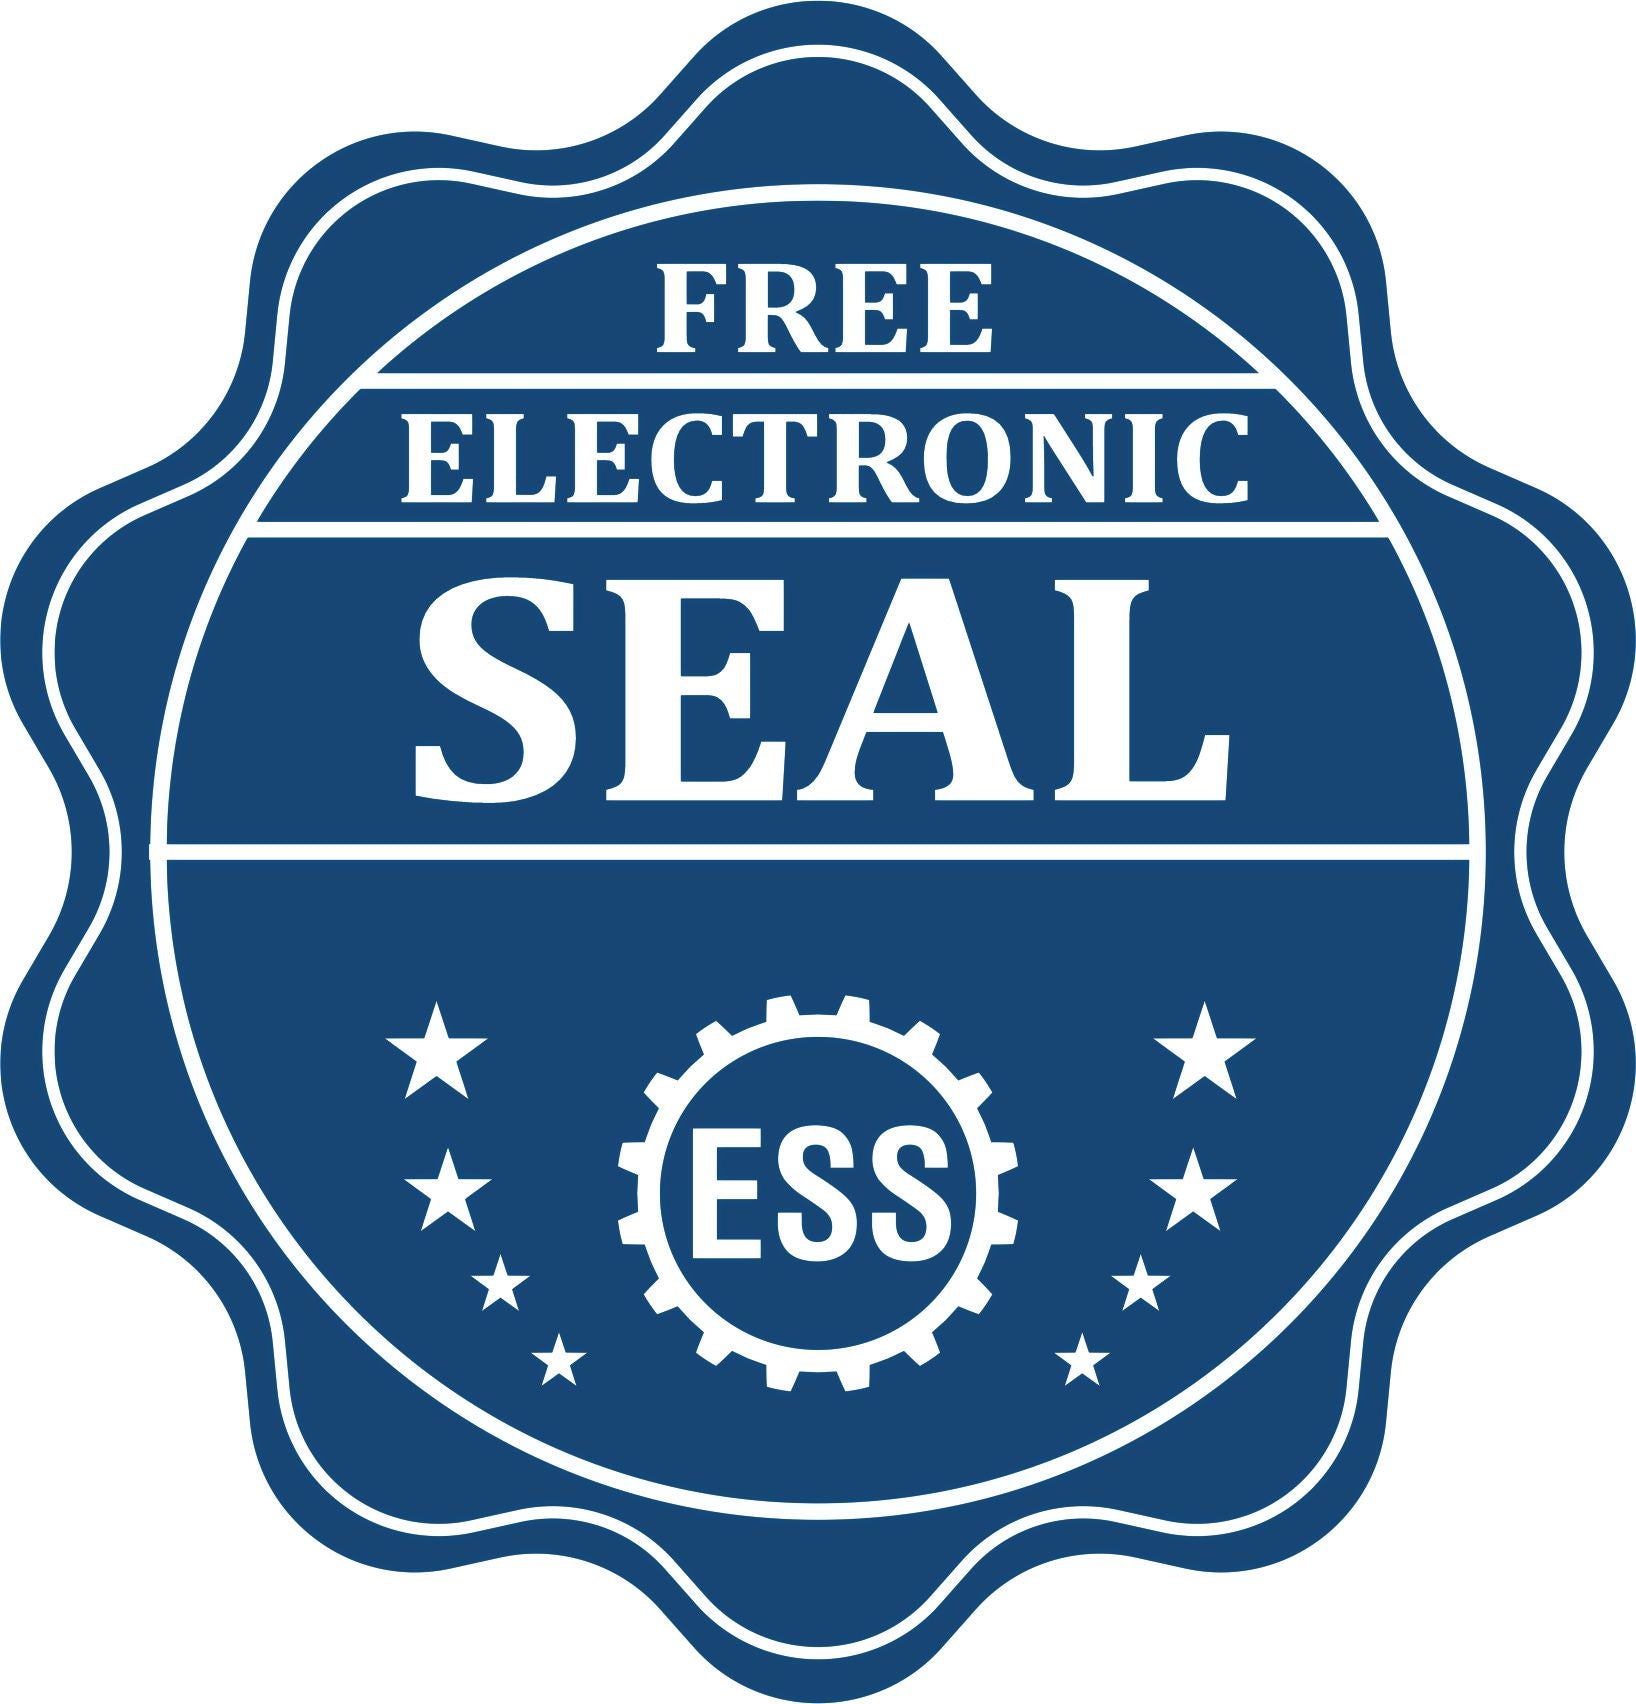 A badge showing a free electronic seal for the State of Nebraska Long Reach Architectural Embossing Seal with stars and the ESS gear on the emblem.